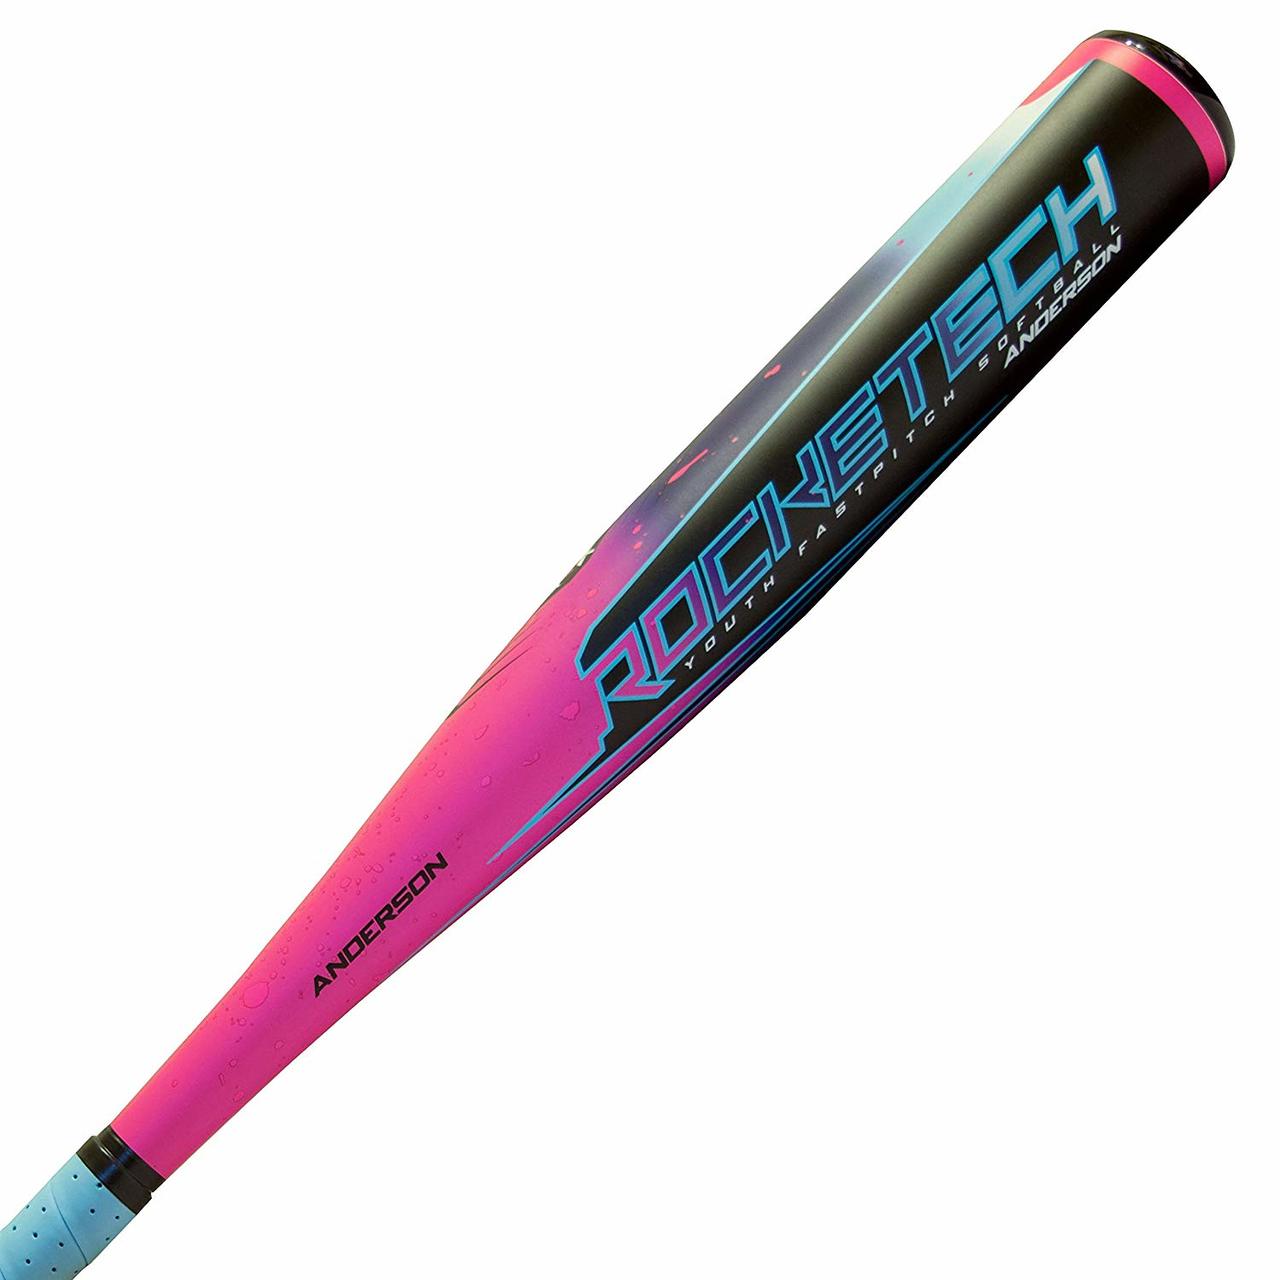 Ideal for girls ages 7-10 2 ¼” Barrel / -12 Drop Weight Ultra Balanced. Hot out of the wrapper, no “break-in” period necessary Approved By All Major Softball Associations Including: ASA, USSSA, NCAA, NSA, and ISA. The 2018 Rocketech -12 Youth Fast Pitch Softball Bat caters to young players coming out of coach pitch. Constructed from our Aerospace Alloy, the power arch technology, single wall design is considered one of our most durable bats so you’ll never worry about your new RocketTech -12 denting or cracking in the middle of a season. The New Rocketech Youth bat has a Muscled Up Barrel. We packed as much mass and muscle into the barrel so you can deliver bone crushing hits into the ball… you’ll always notice how quickly and effortlessly the ball will spring off the barrel. Ideal for girls ages 7-10 Ultra Thin Whip Handle for better bat speed 2 ¼” Barrel -12 Drop Weight Ultra balanced Hot out of the wrapper, no “break-in” period necessary Newly designed and strengthened light weight end cap AB-9000 PowerArch Single Wall Aerospace Alloy Barrel Meets BPF 1.20 Standards